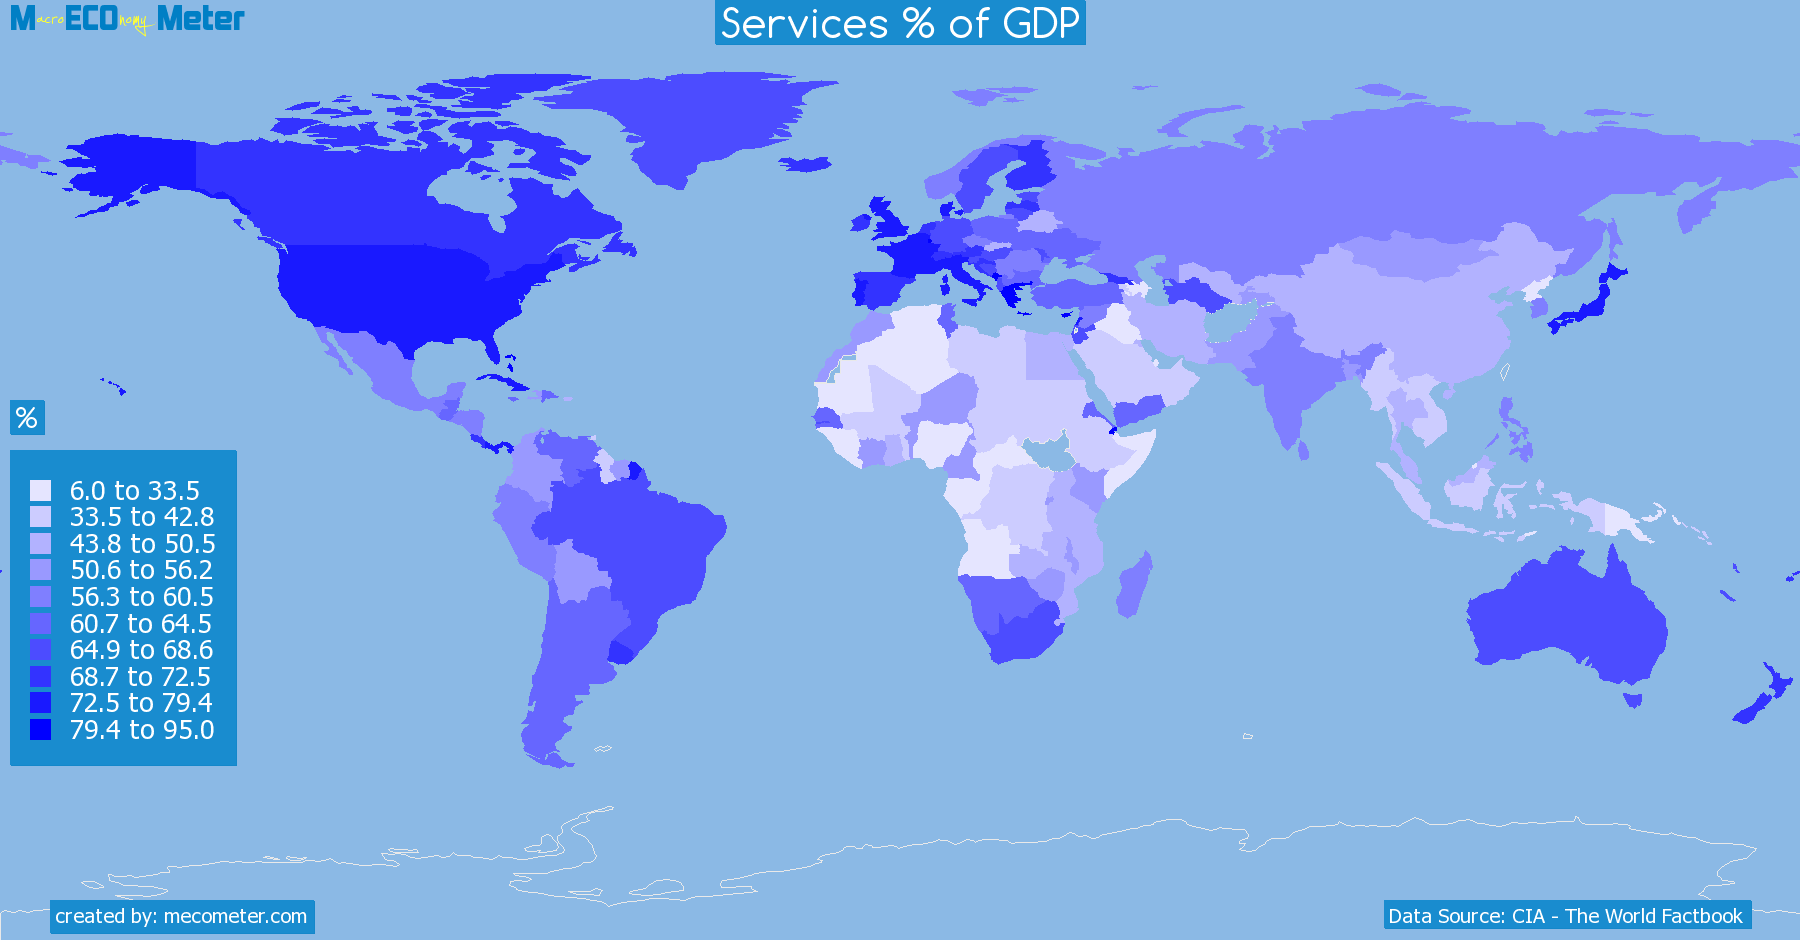 Worldmap of all countries colored to reflect the values of Services % of GDP